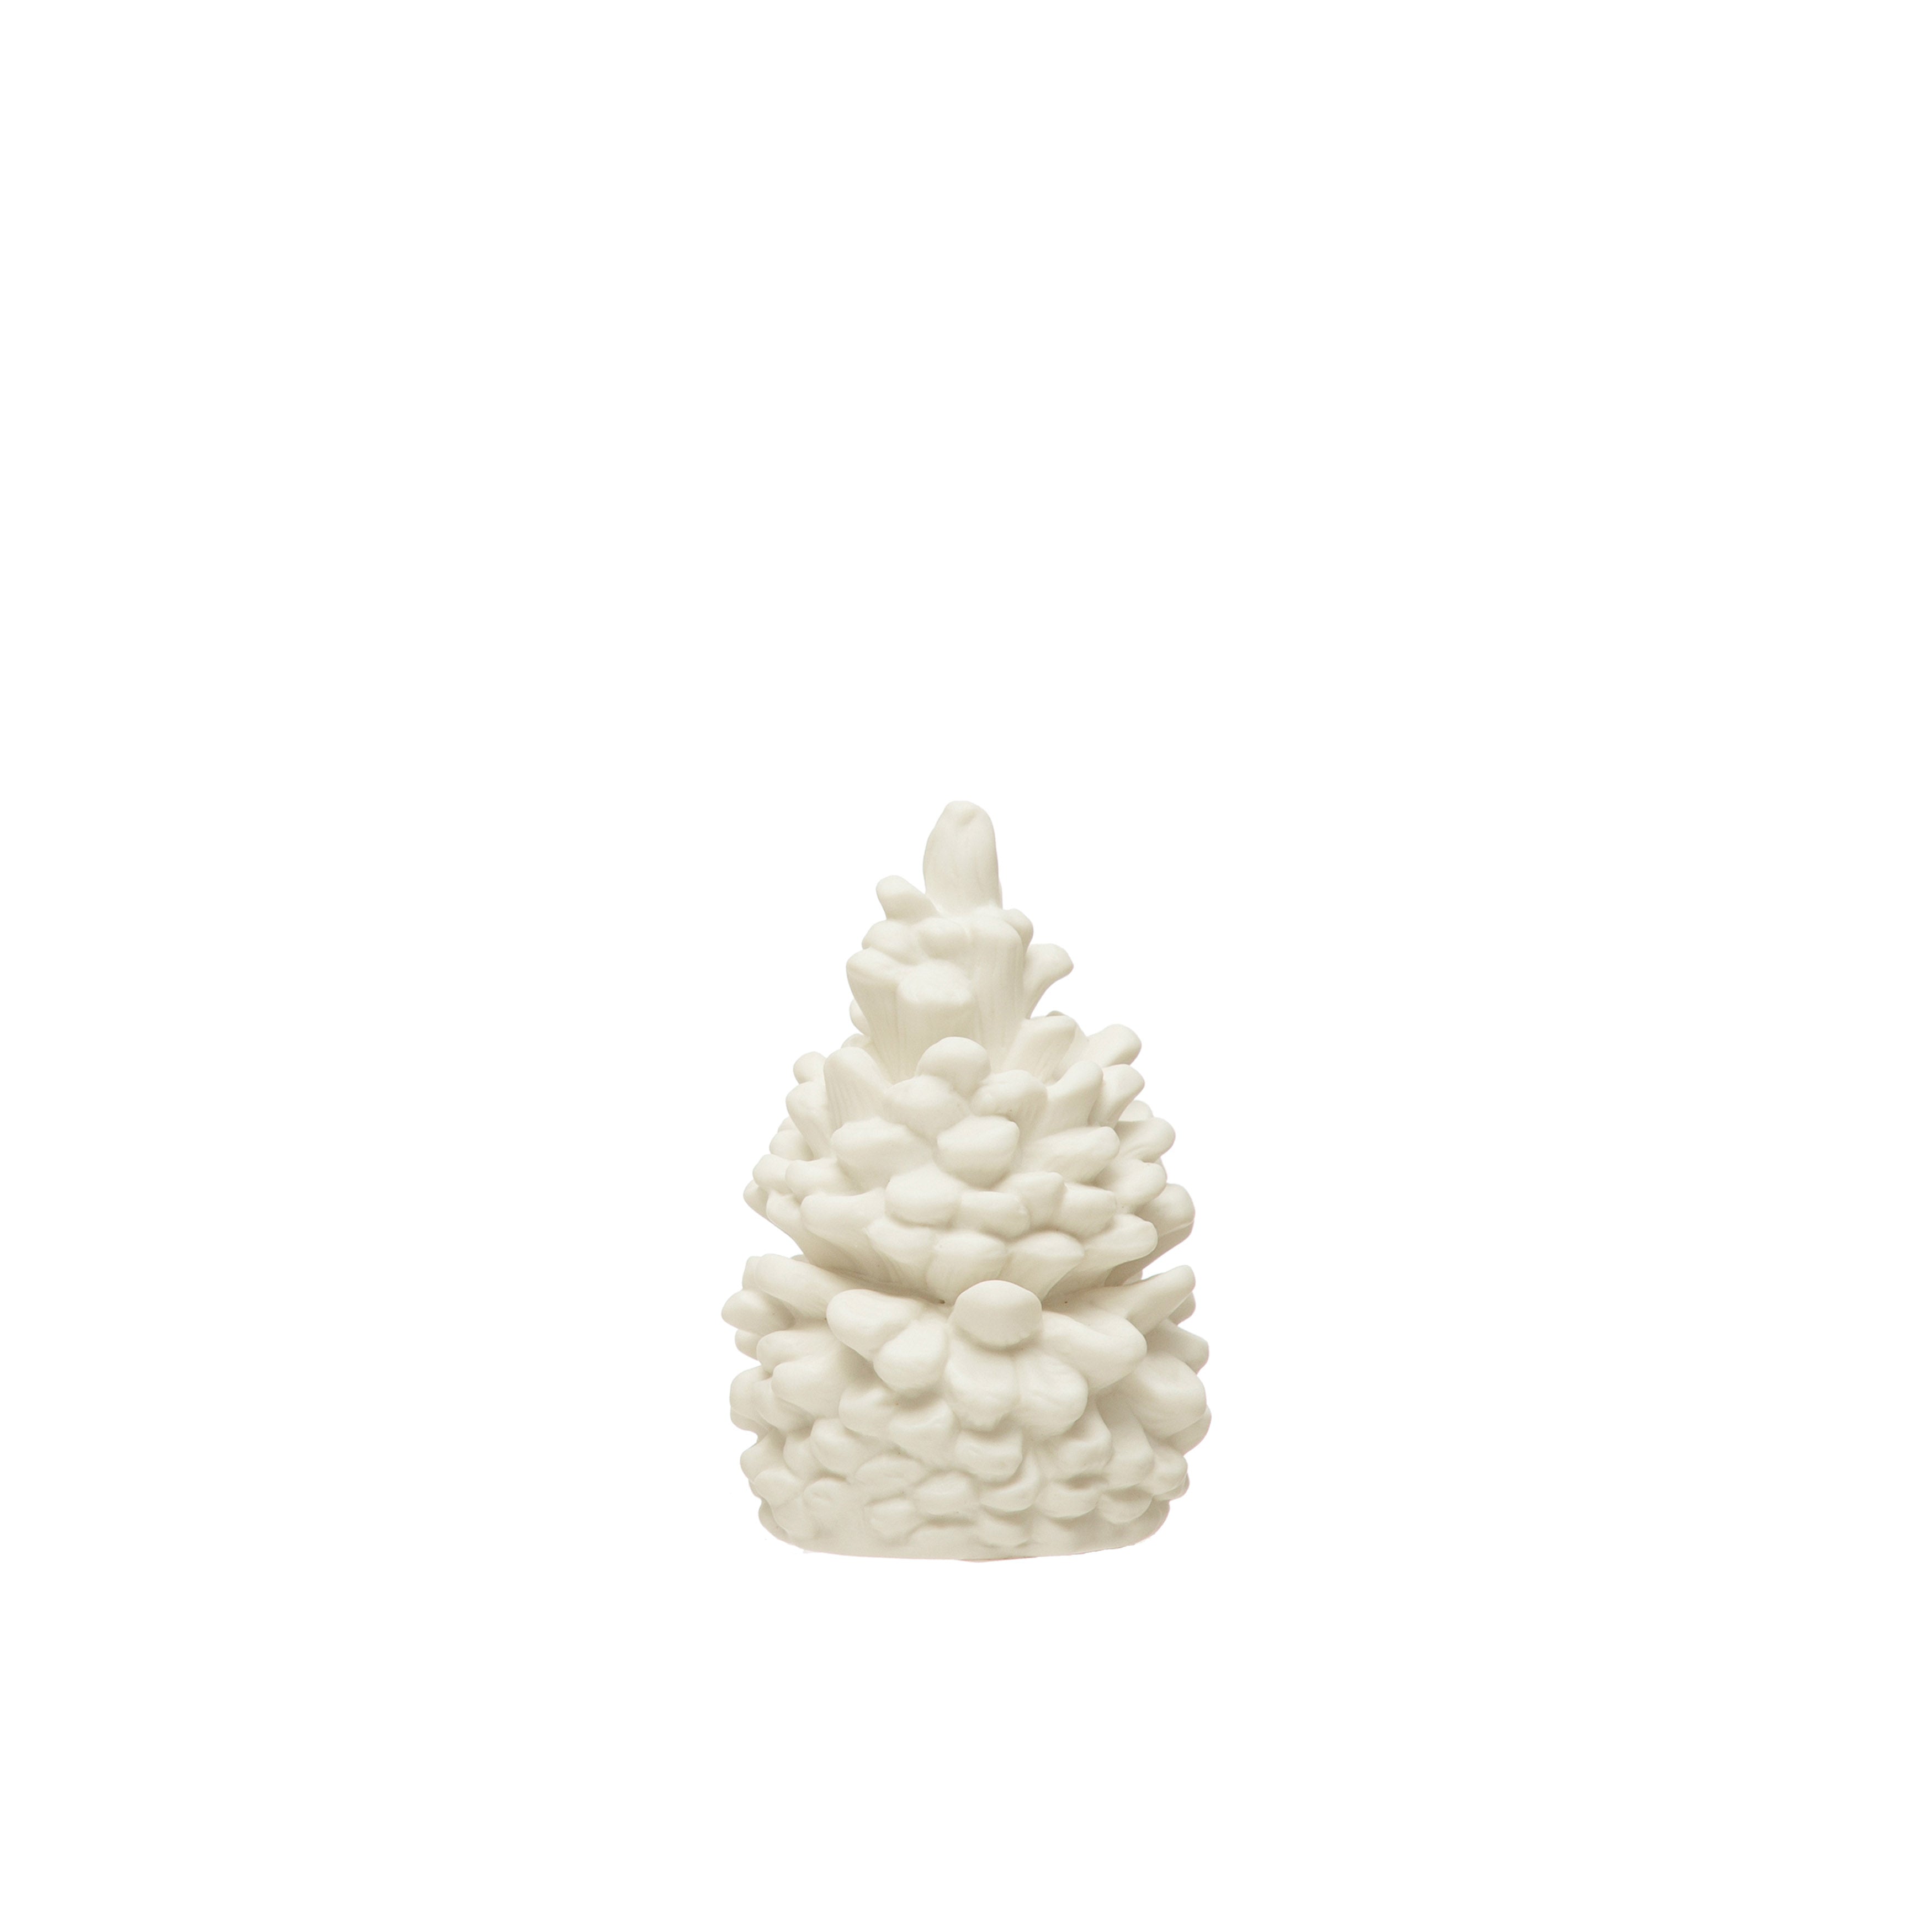 Bisque Pinecone Object (S)